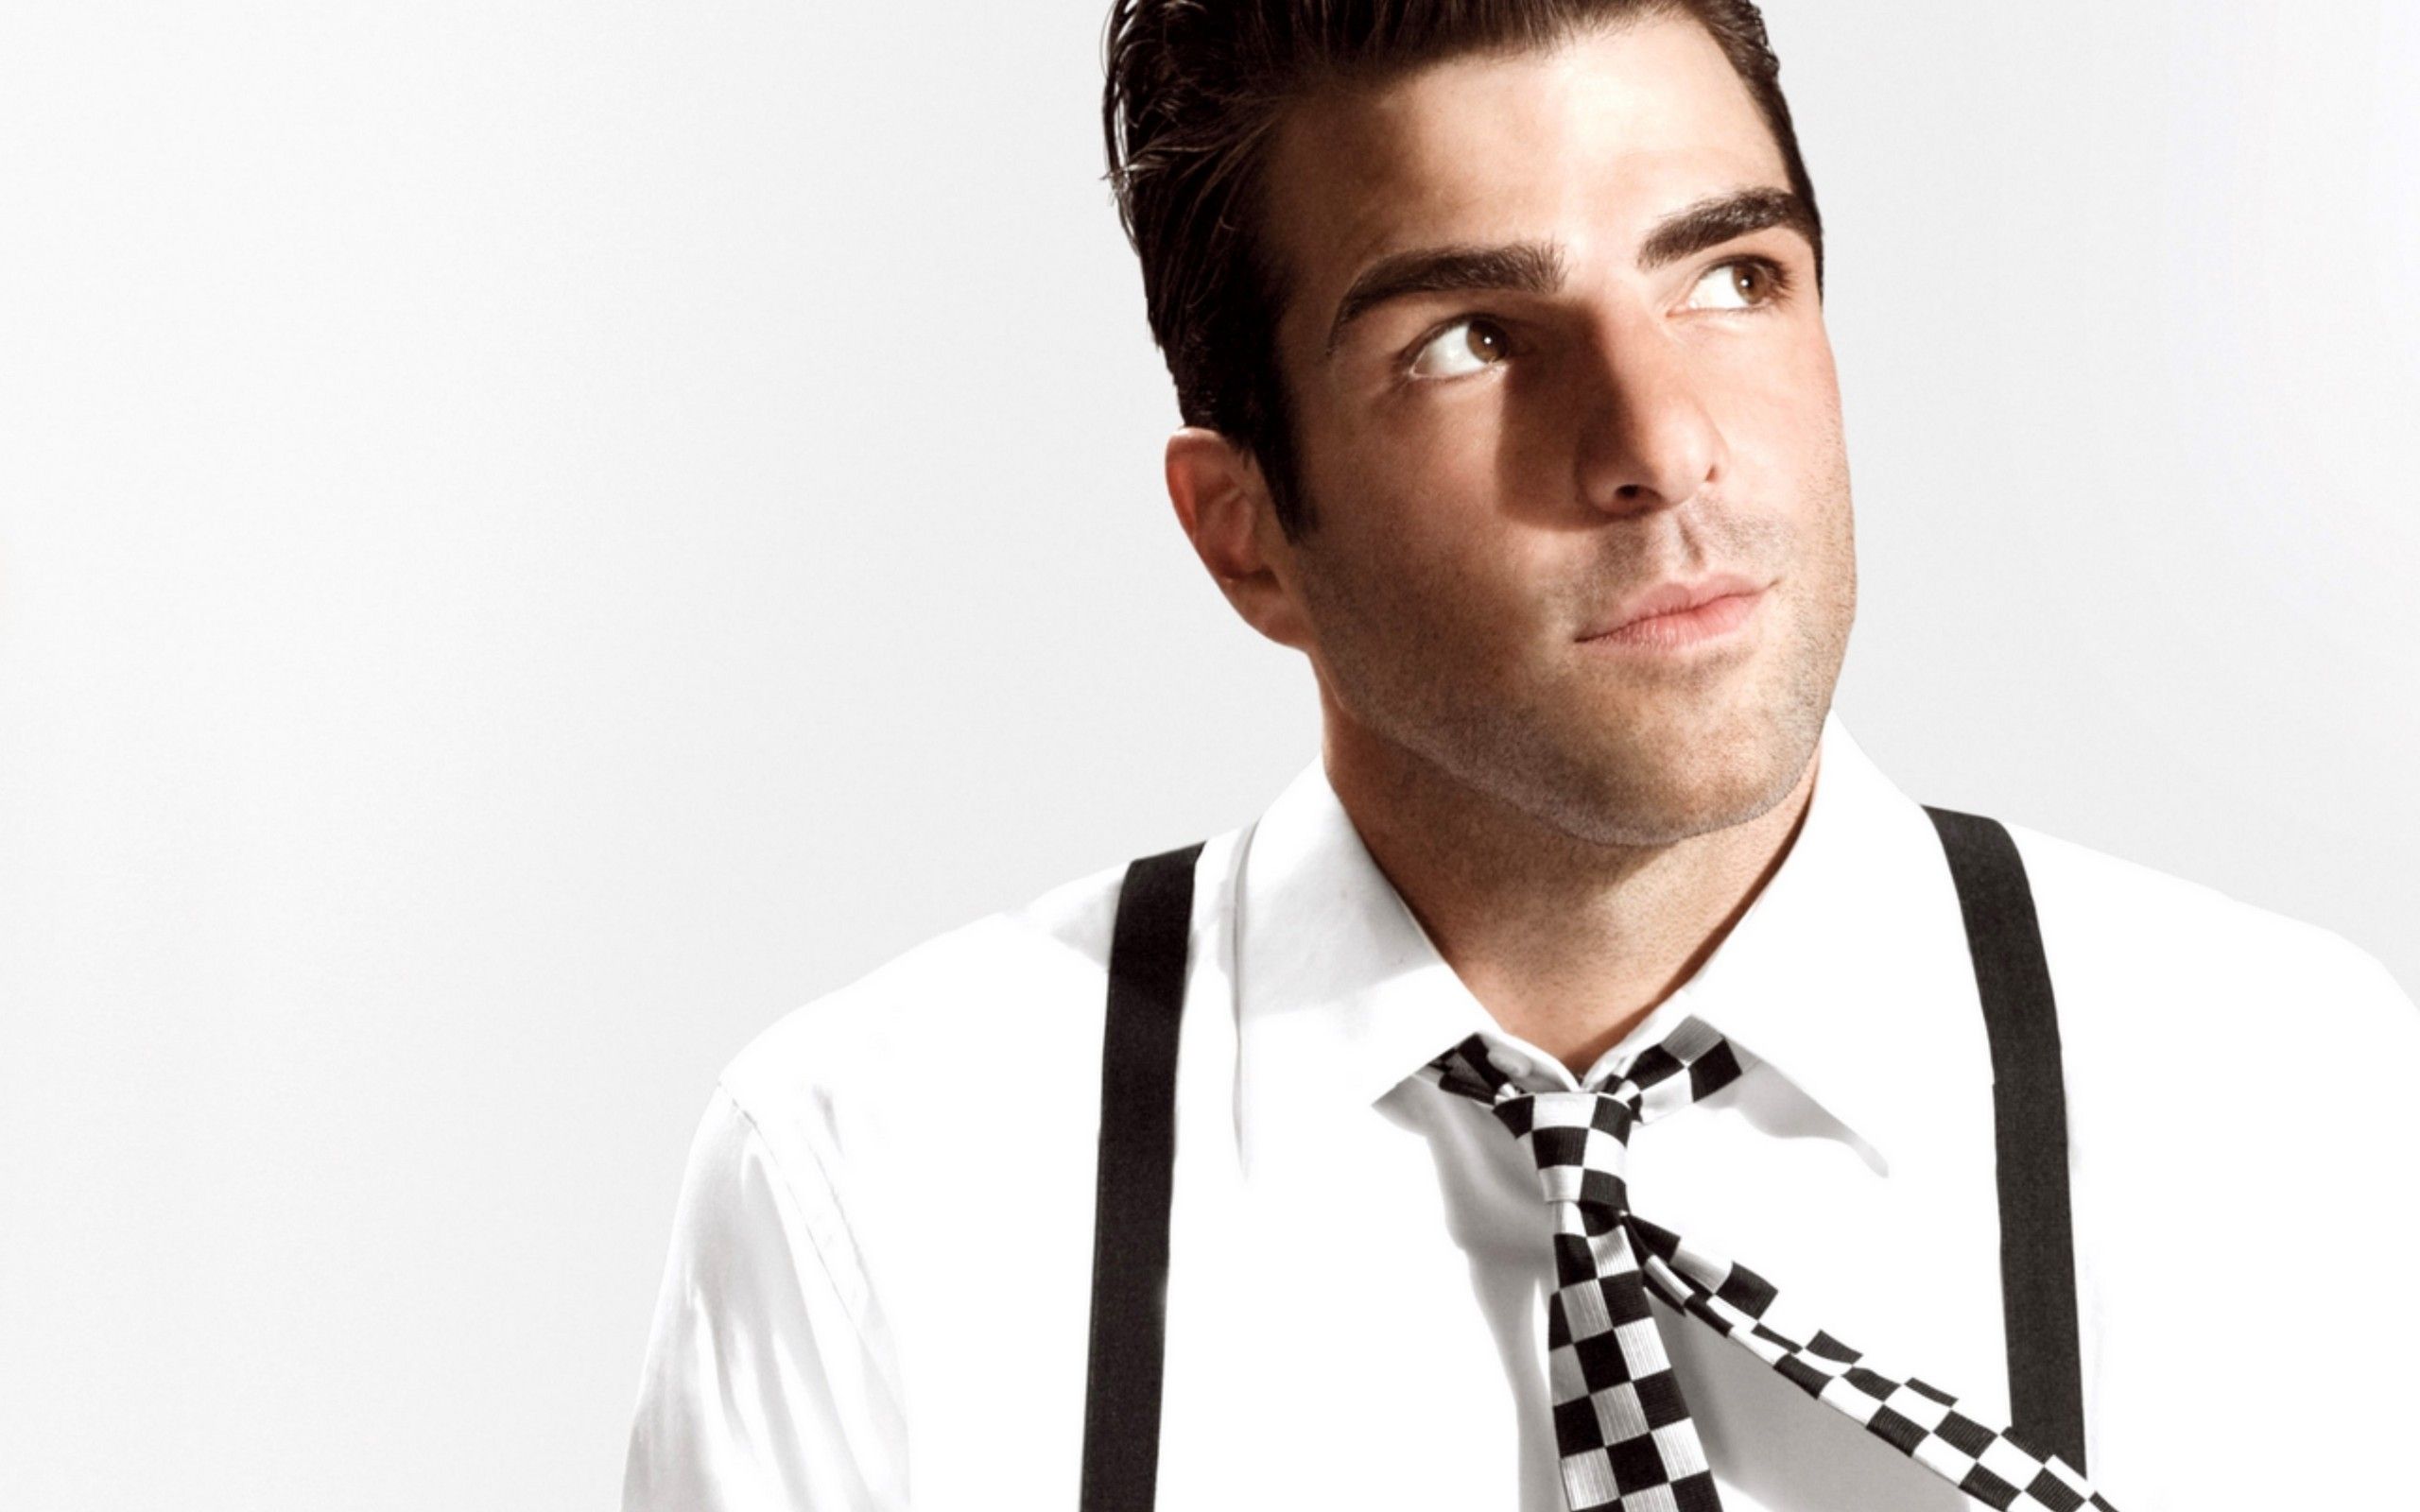 Zachary Quinto Full HD Widescreen wallpapers for desktop